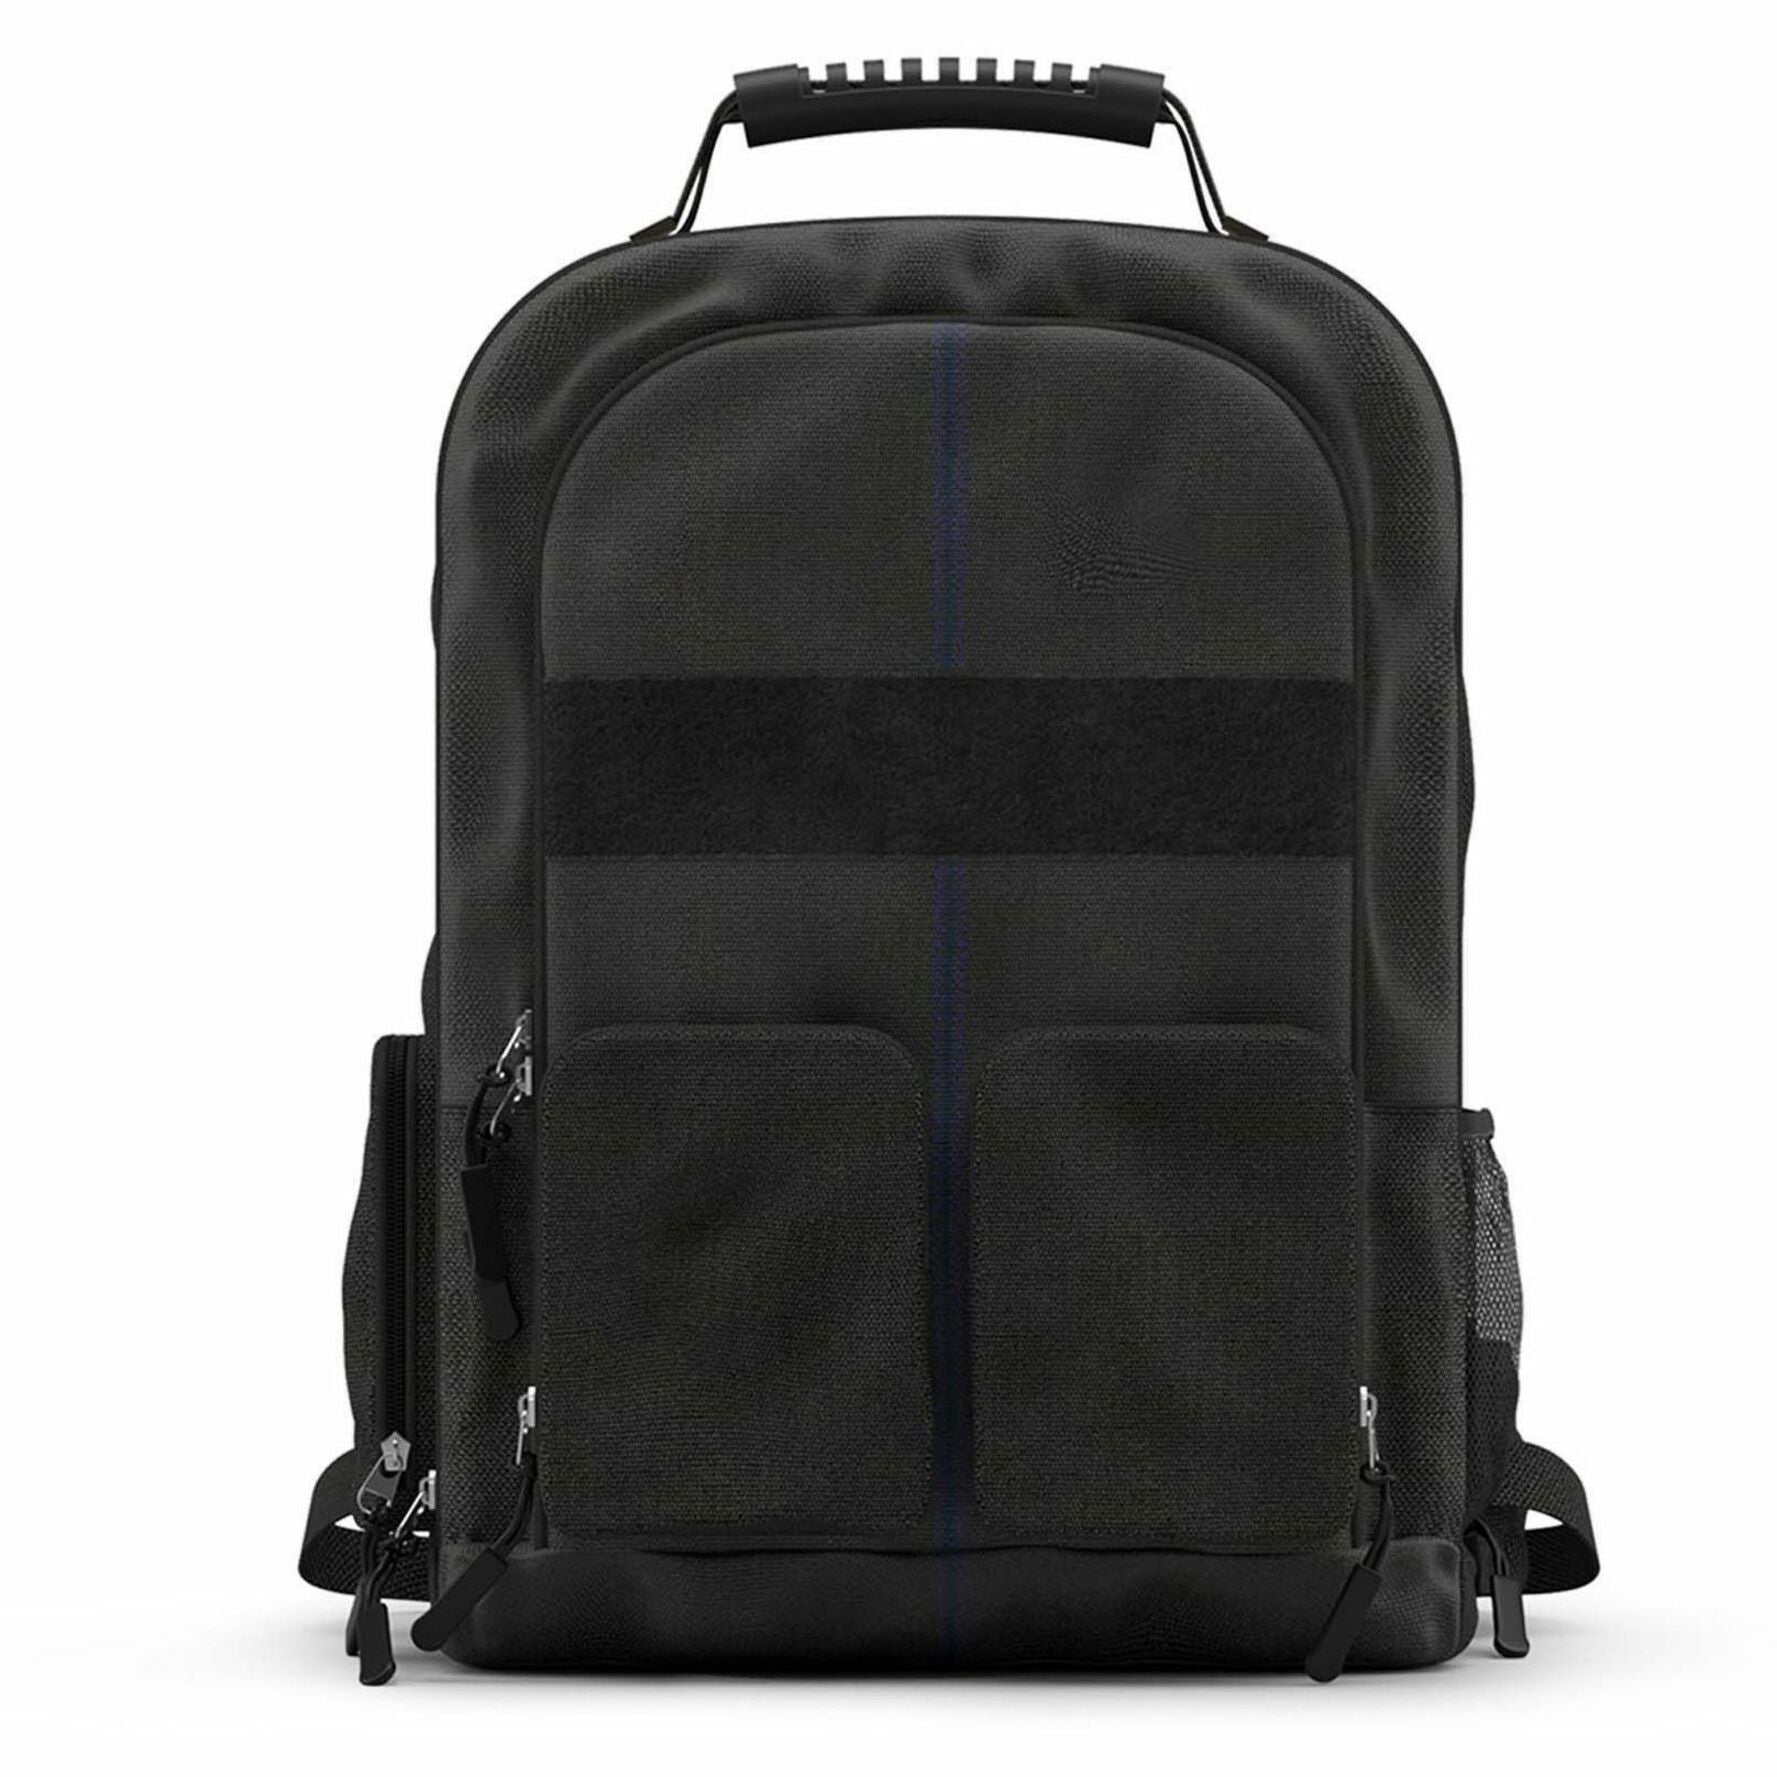 MAXCases MC-BP-ESPT2-BLK E-Sports Gaming Backpack 2.0 (Black), Ultimate Gaming Companion